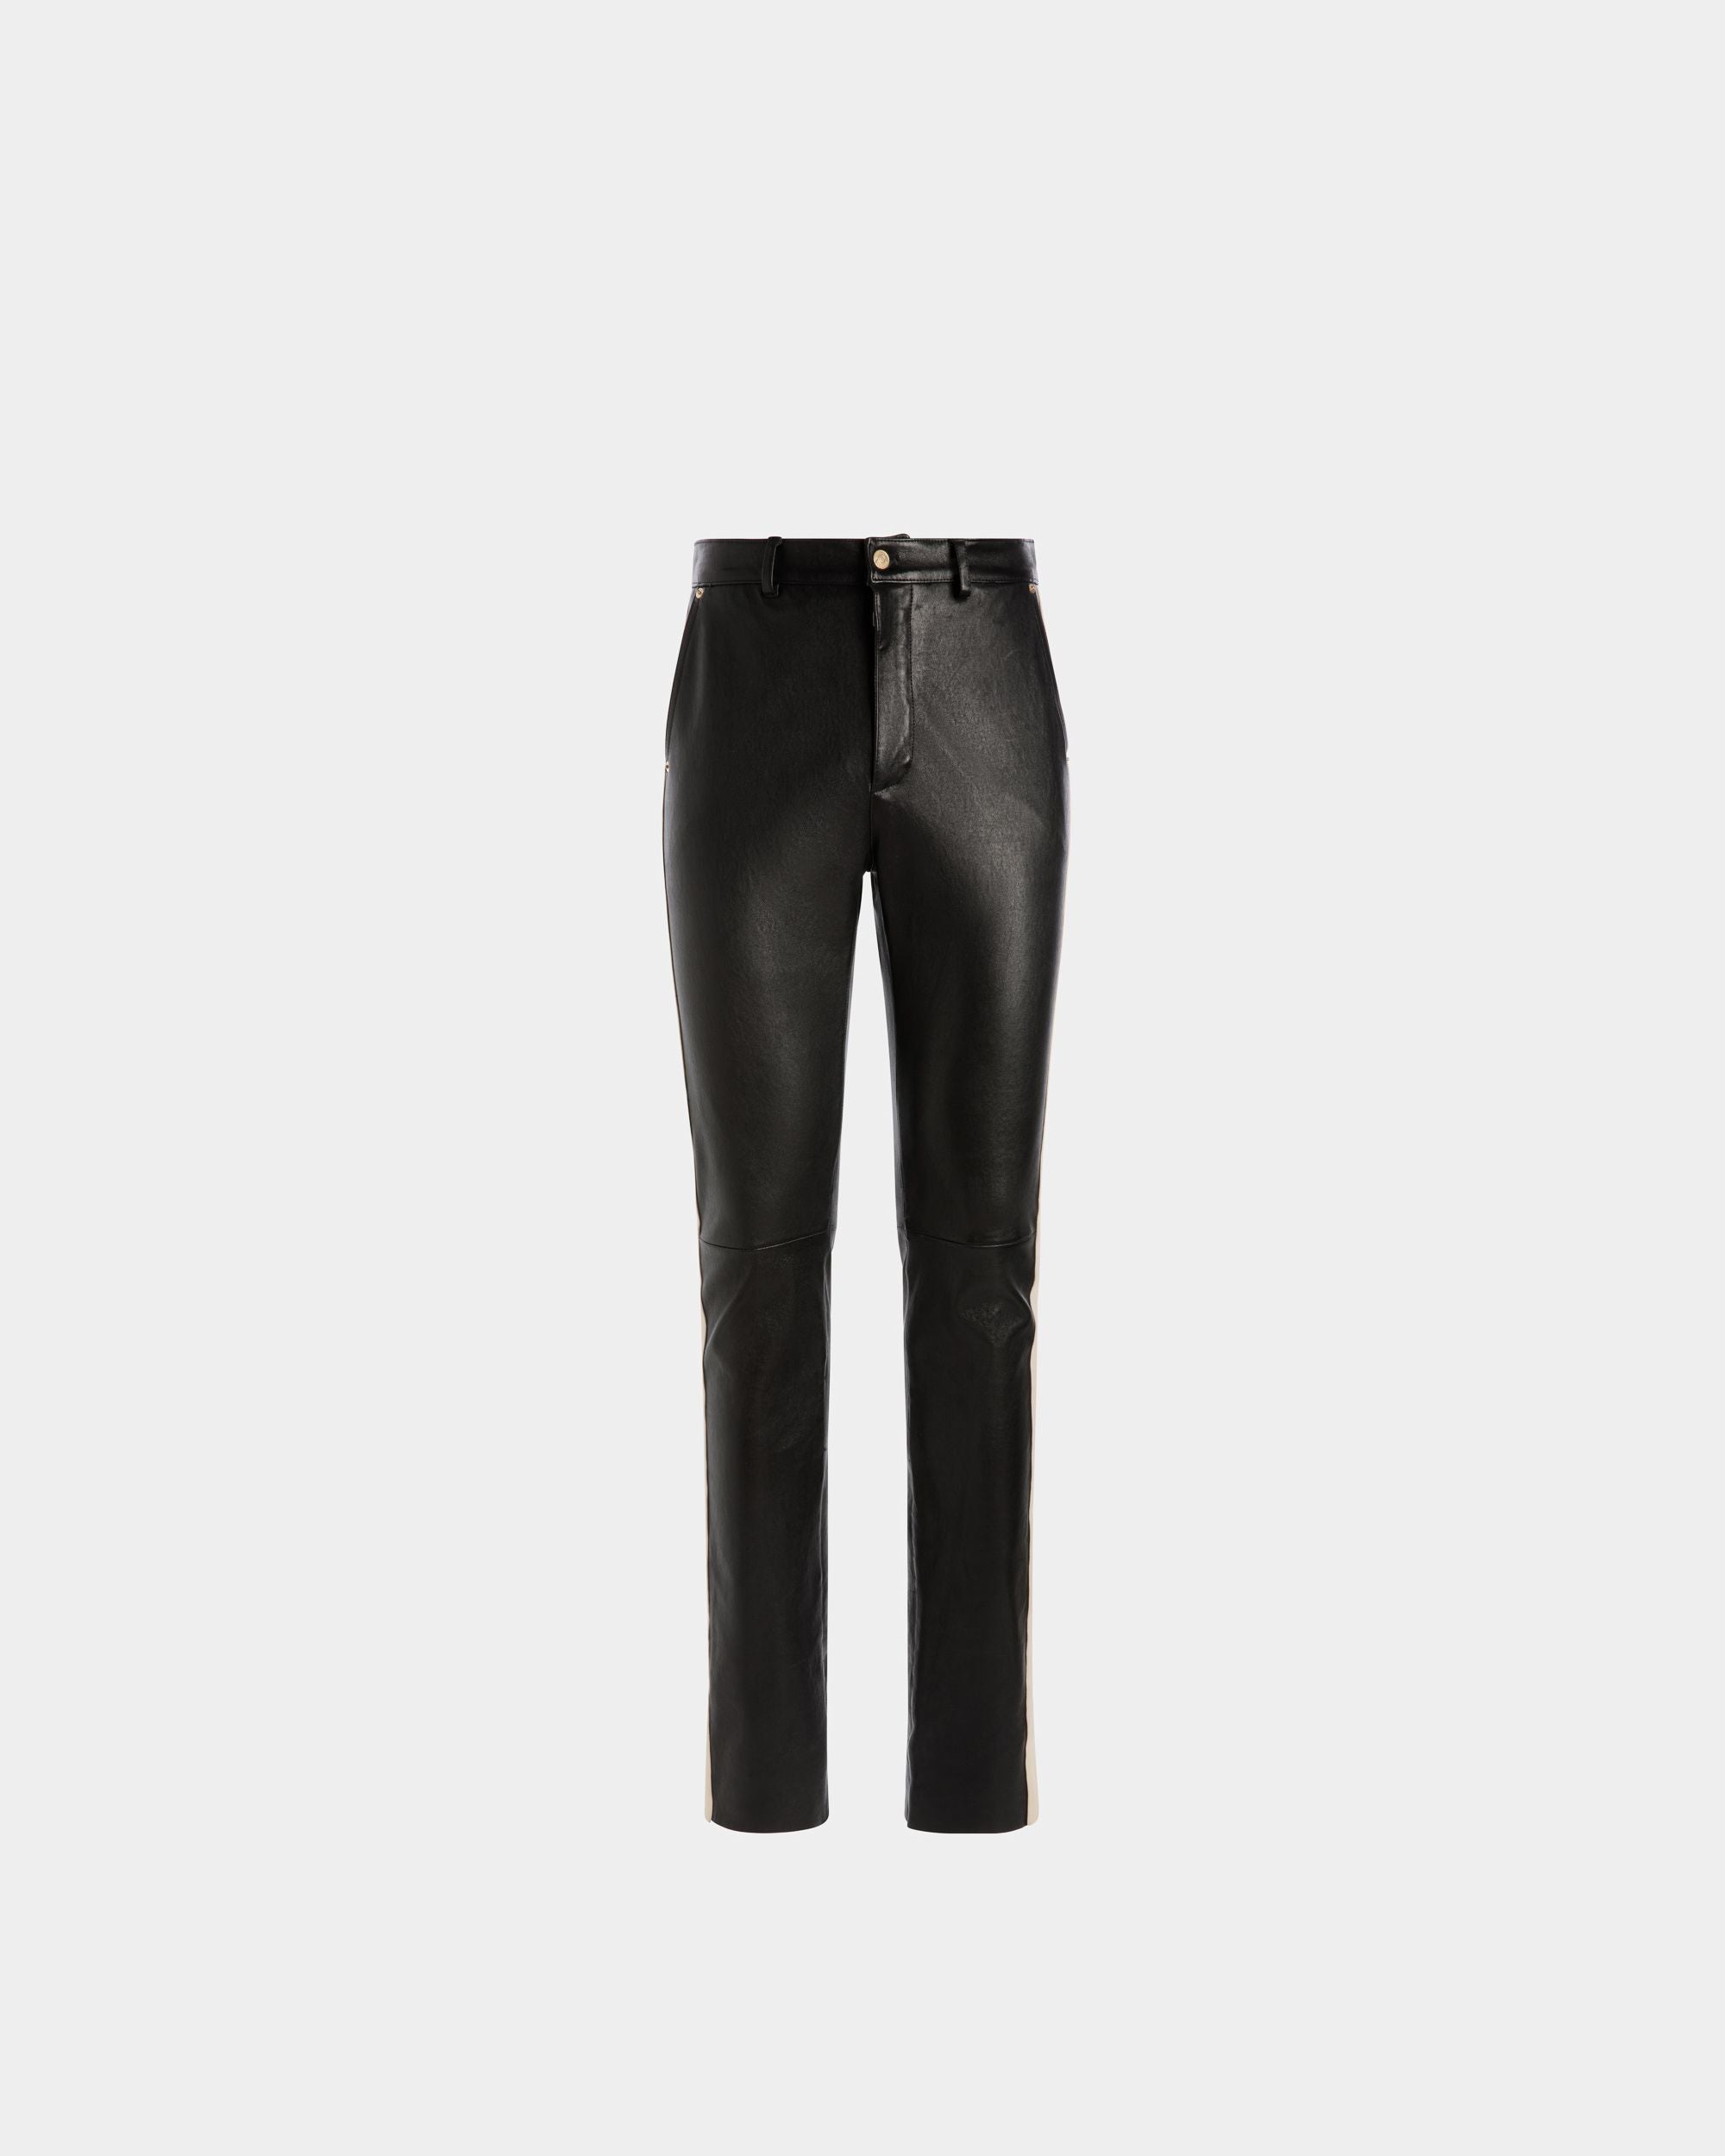 Nappa Stretch Trousers | Men's Trousers | Black Leather | Bally | Still Life Front